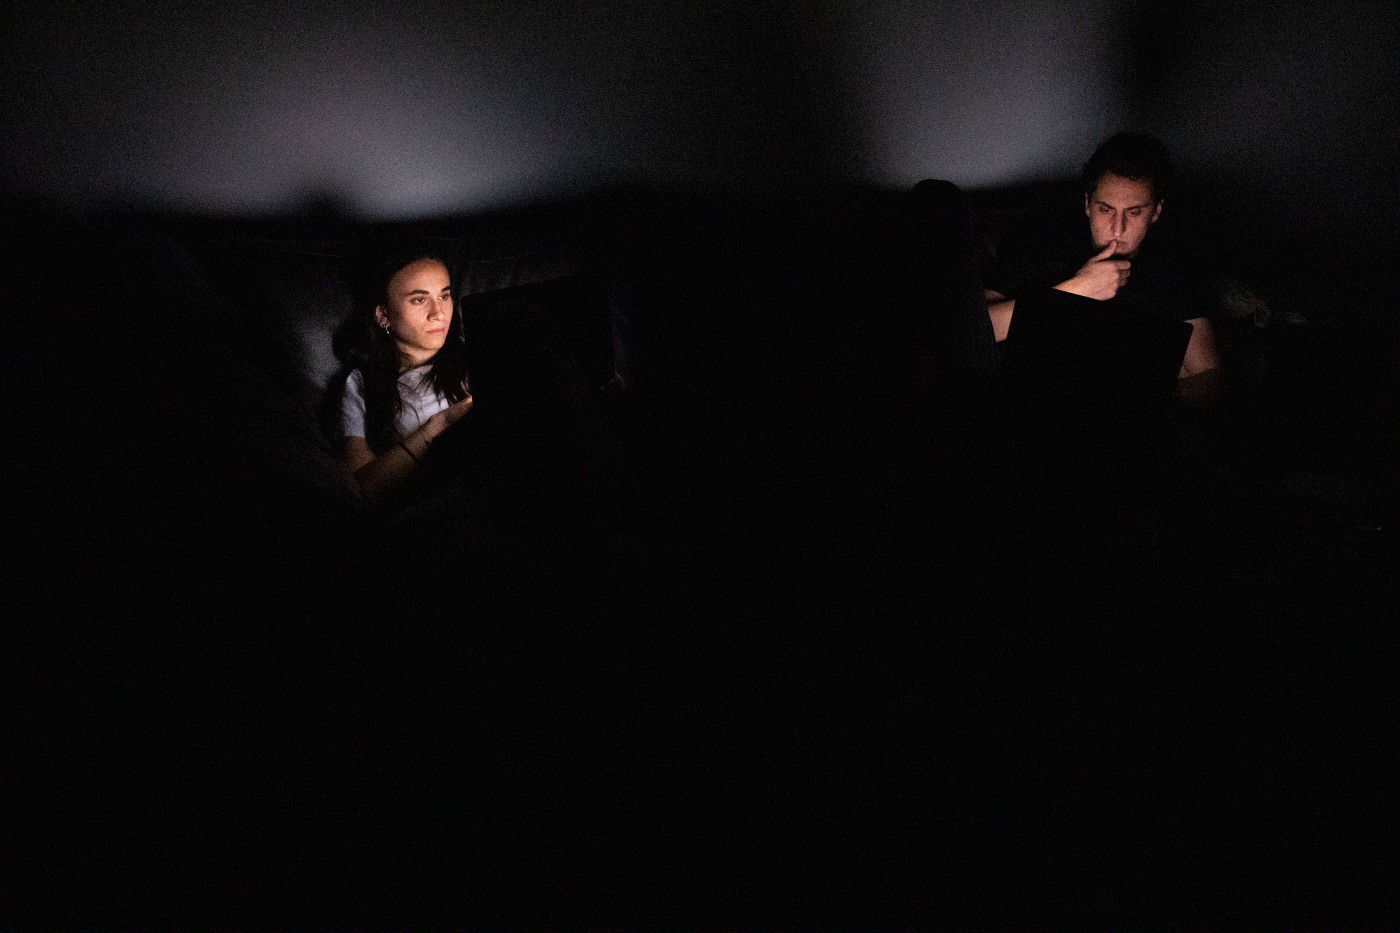 2 people sitting apart with dramatic lighting